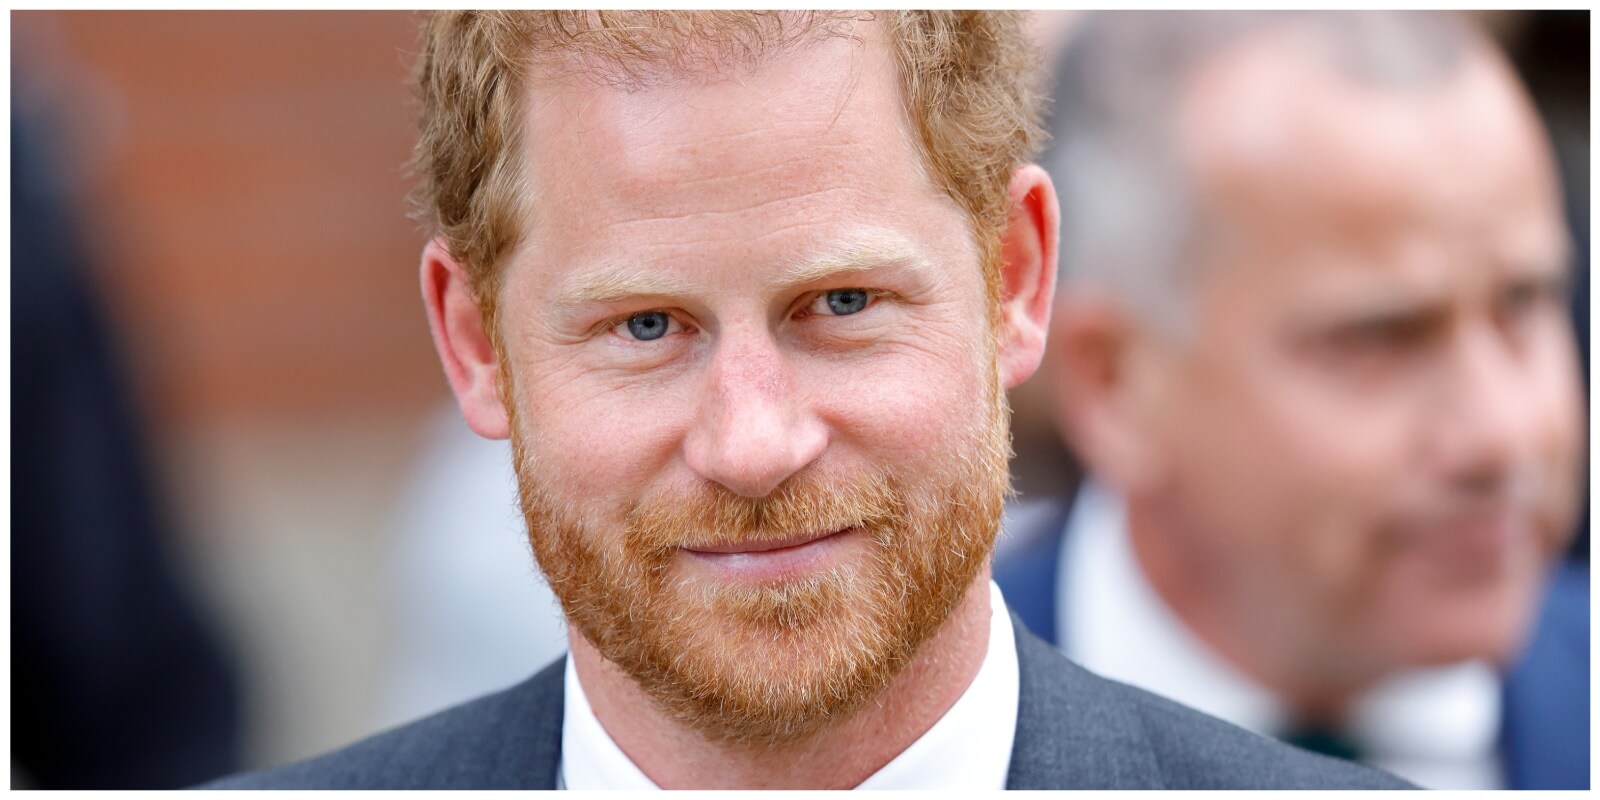 Prince Harry is photographed as departs the Royal Courts of Justice on March 30, 2023 in London, England.